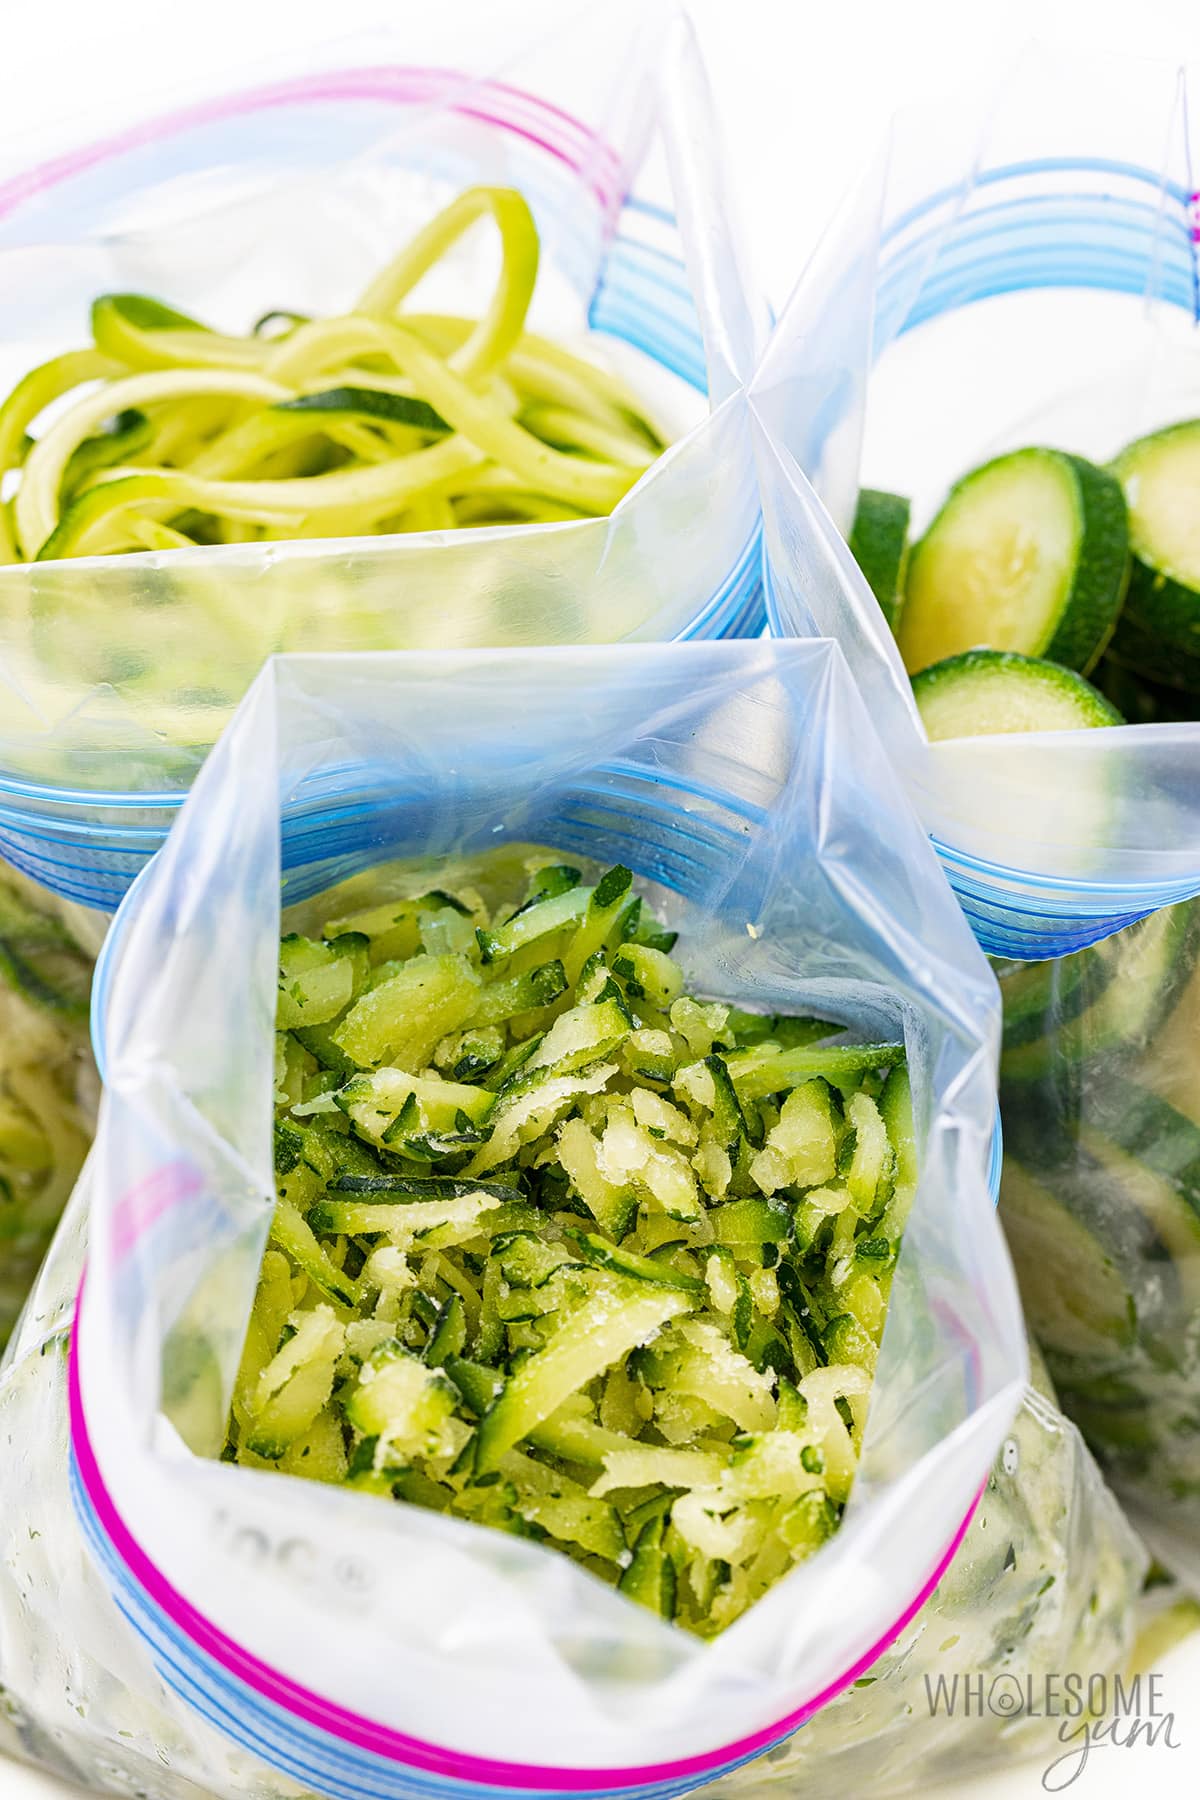 Three methods for how to freeze zucchini in freezer bags.